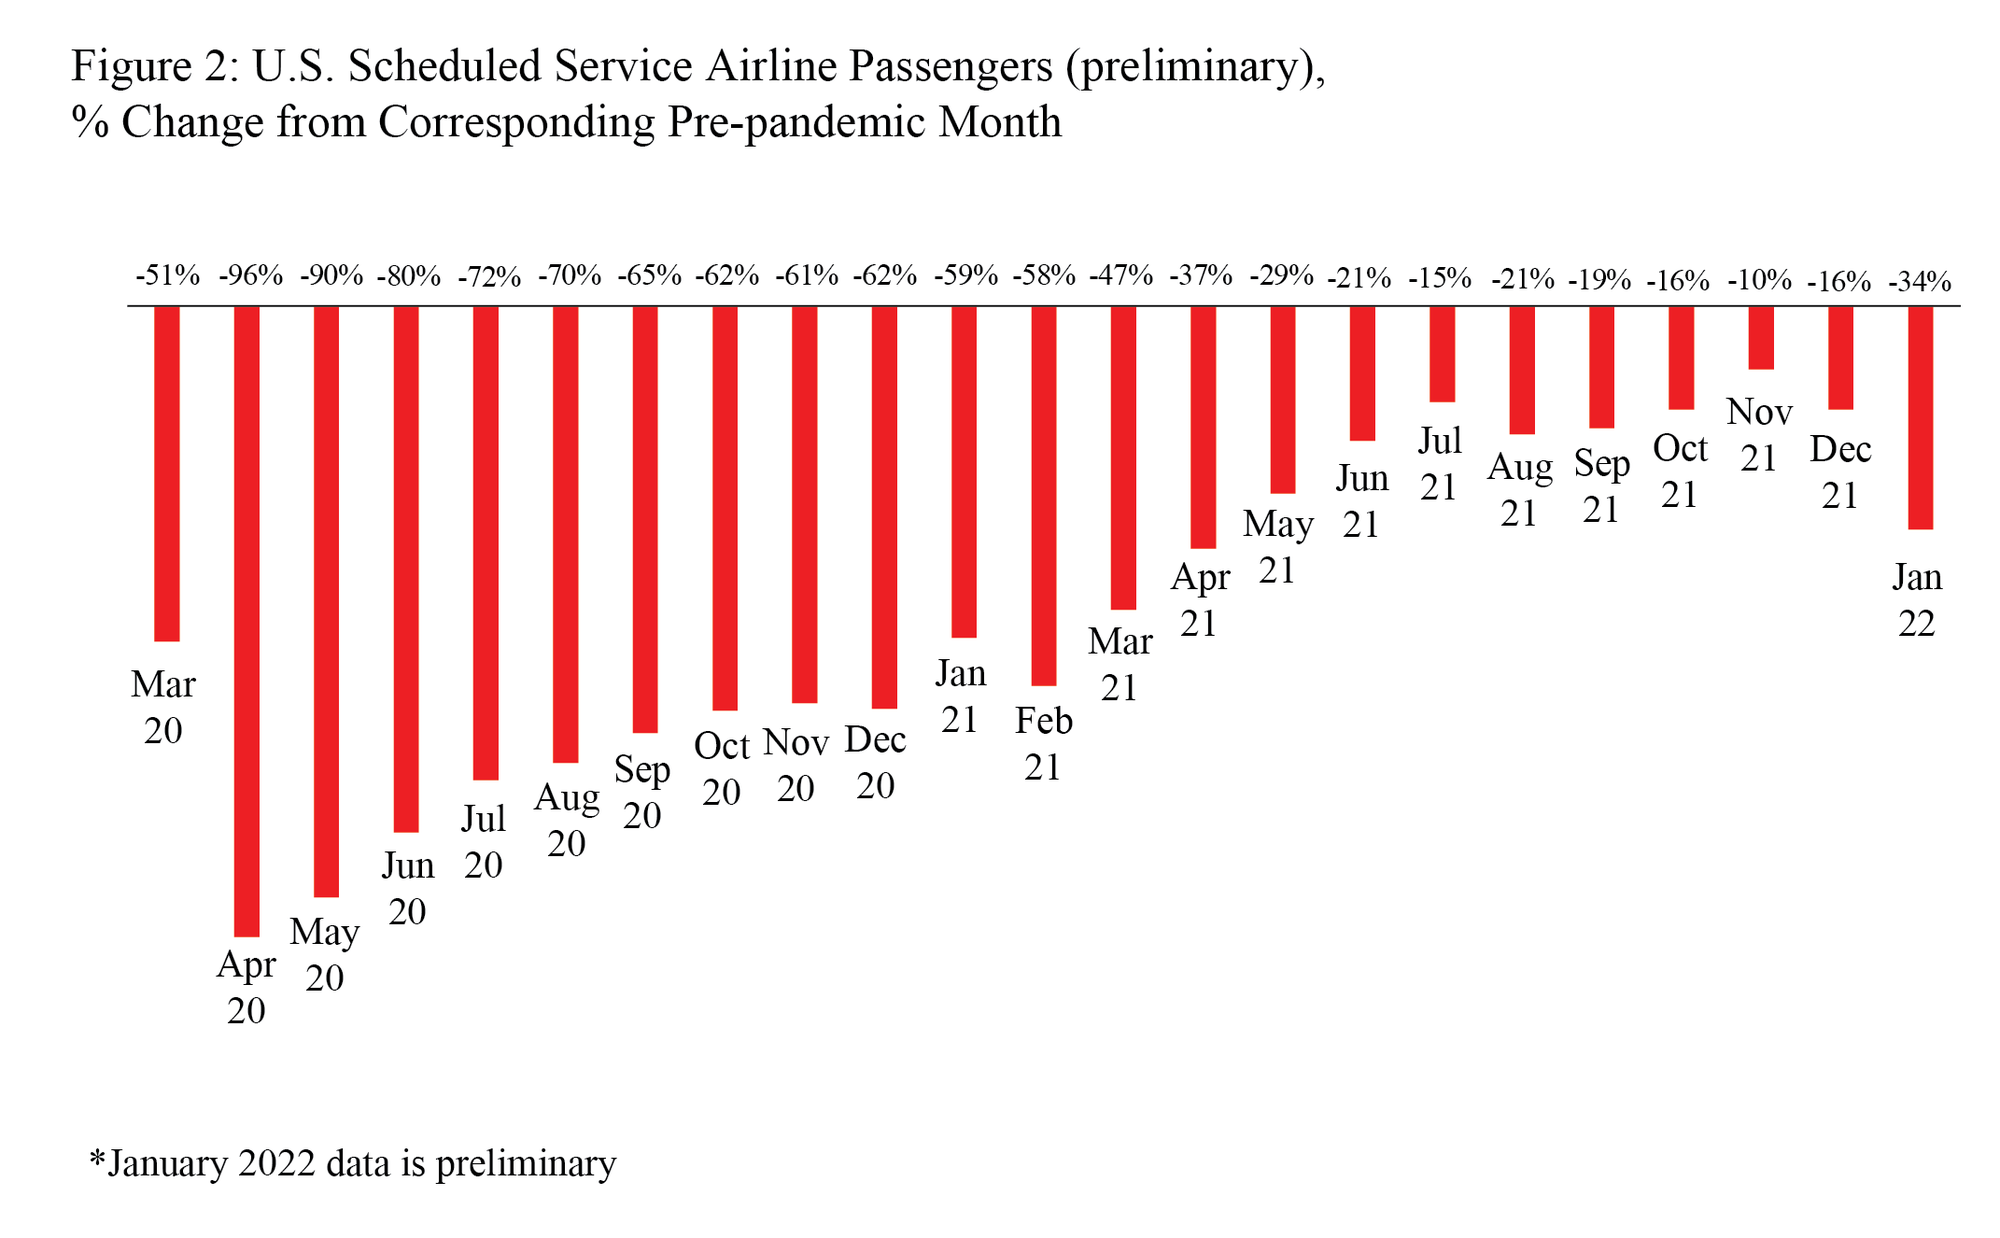 Figure 1: U.S. Scheduled Service Airline Passengers (Preliminary) %Change from Corresponding Pre-pandemic Month